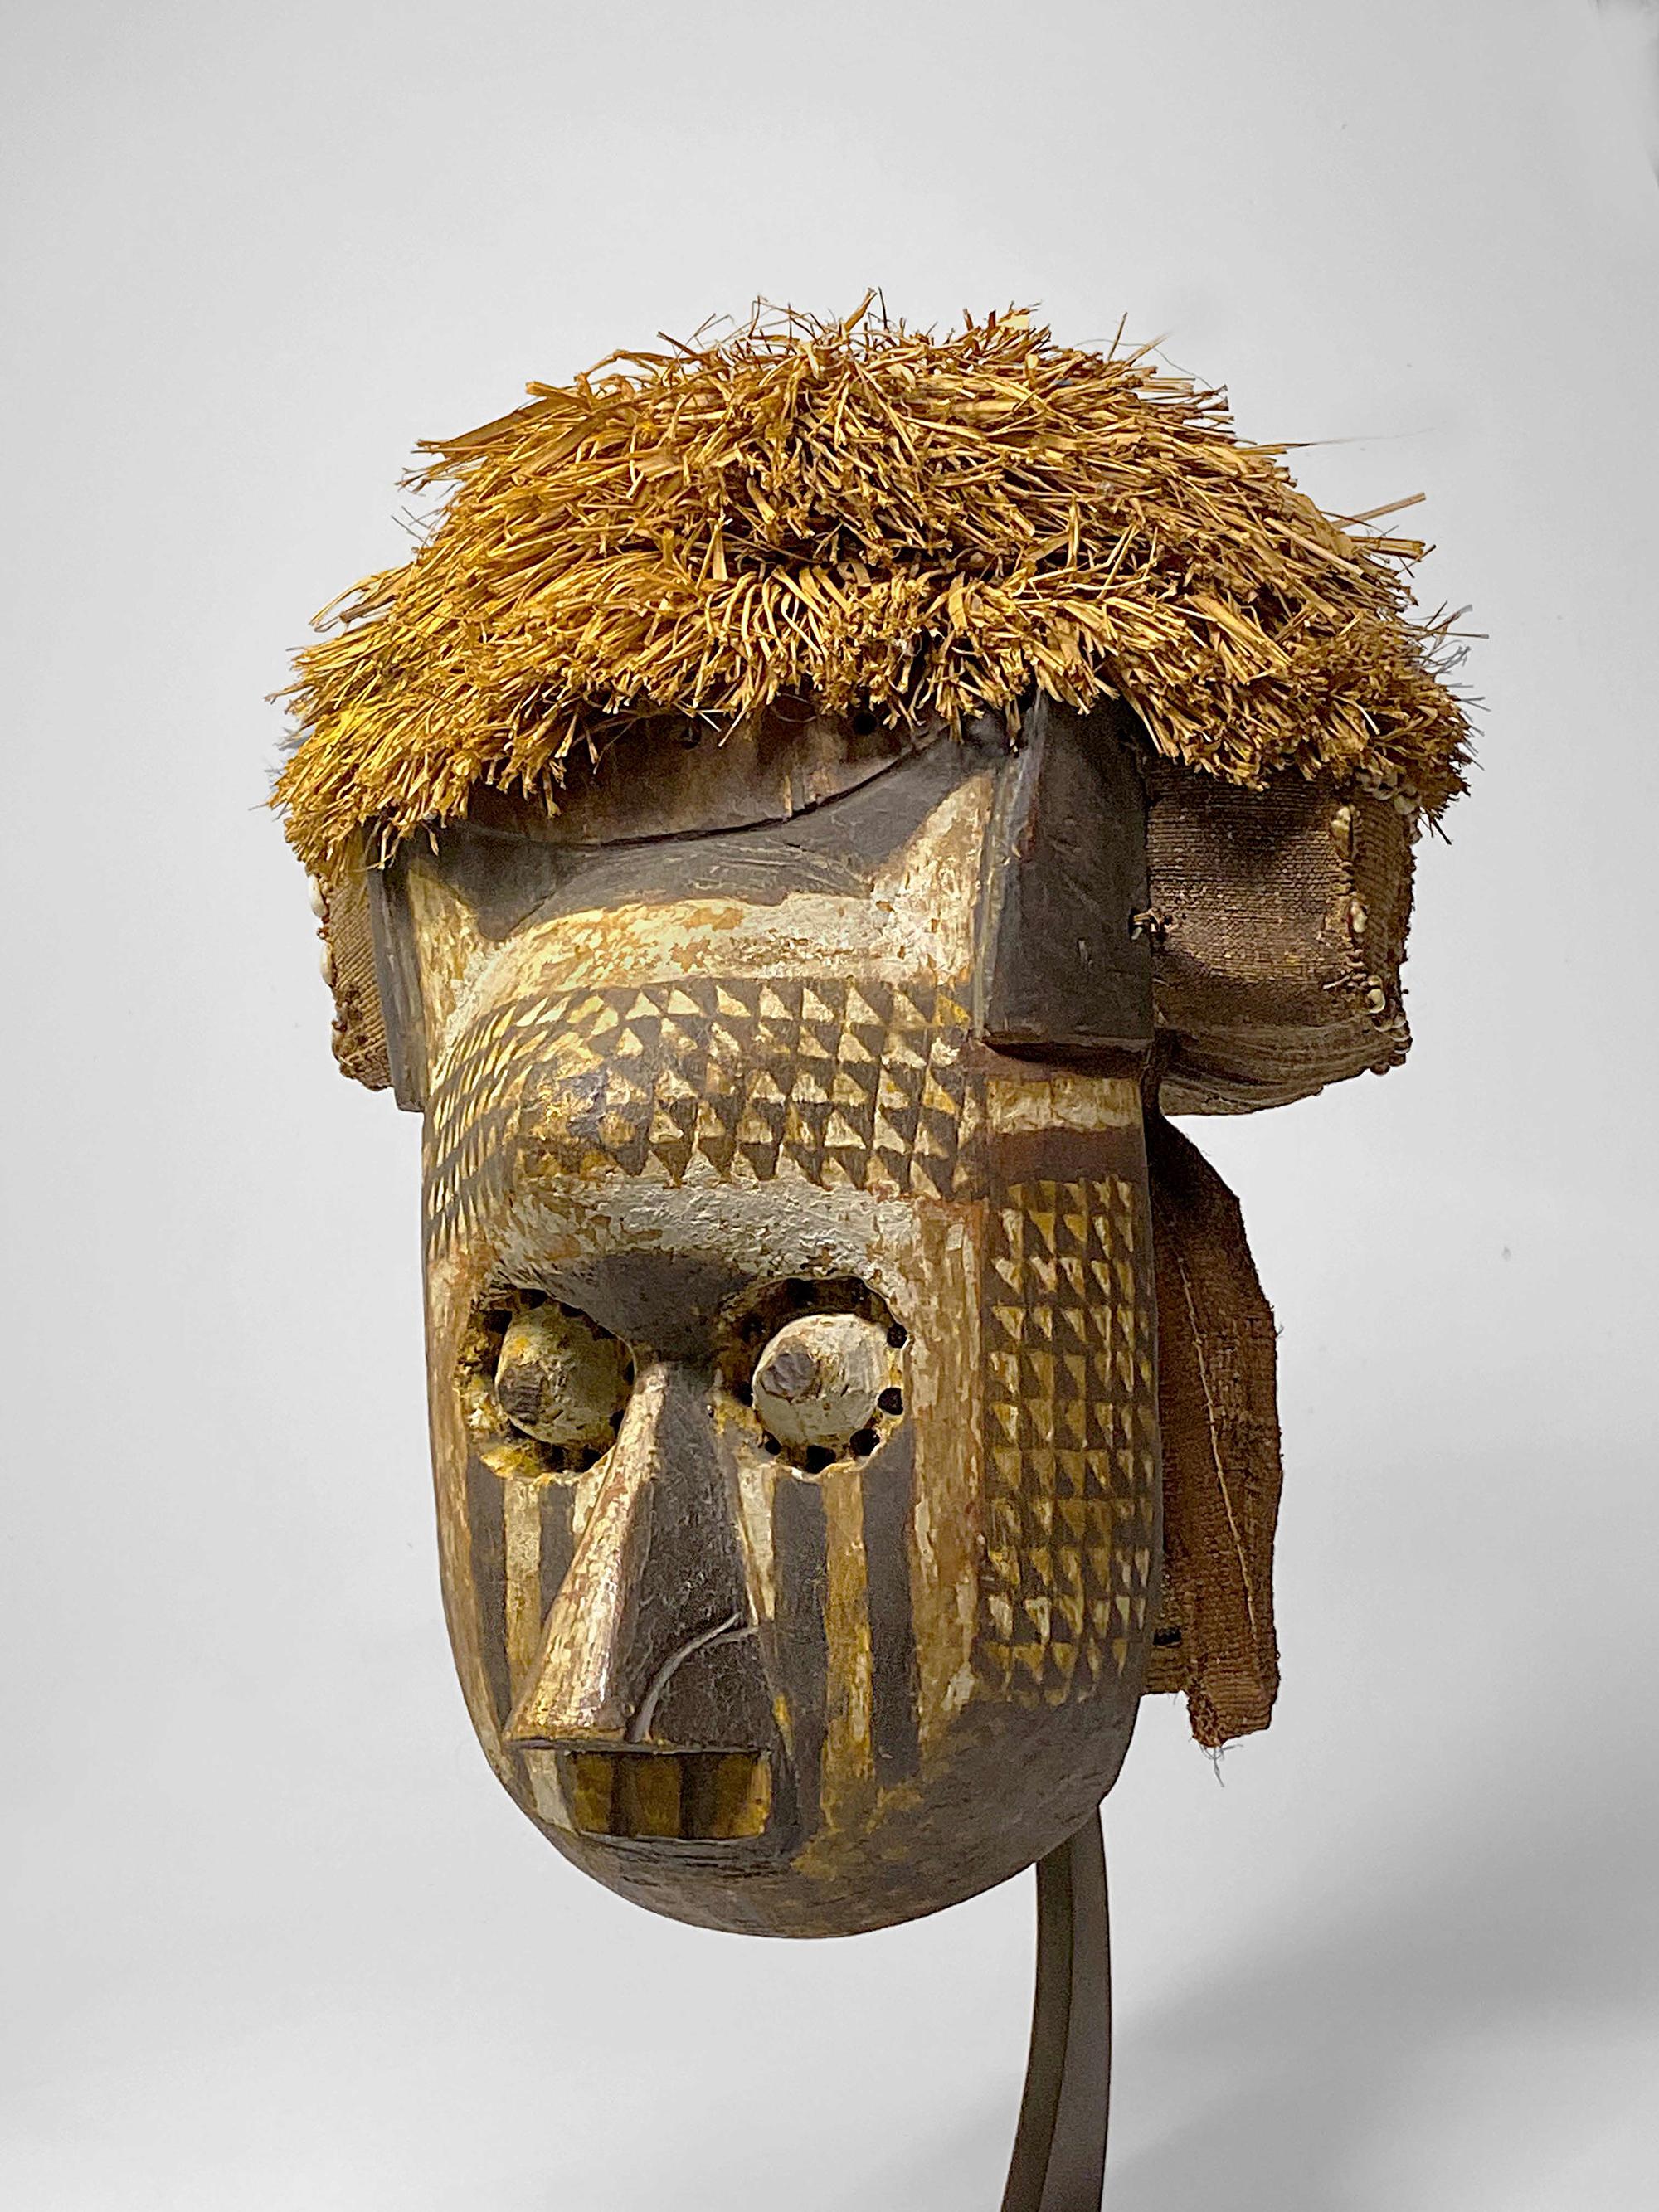 This classic early 20th century Itok mask is from the Kuba/Ngeende culture in the Democratic Republic of the Congo.  It is rare to find an example with original raffia attachments.  This is a particularly graphic example painted with white and black